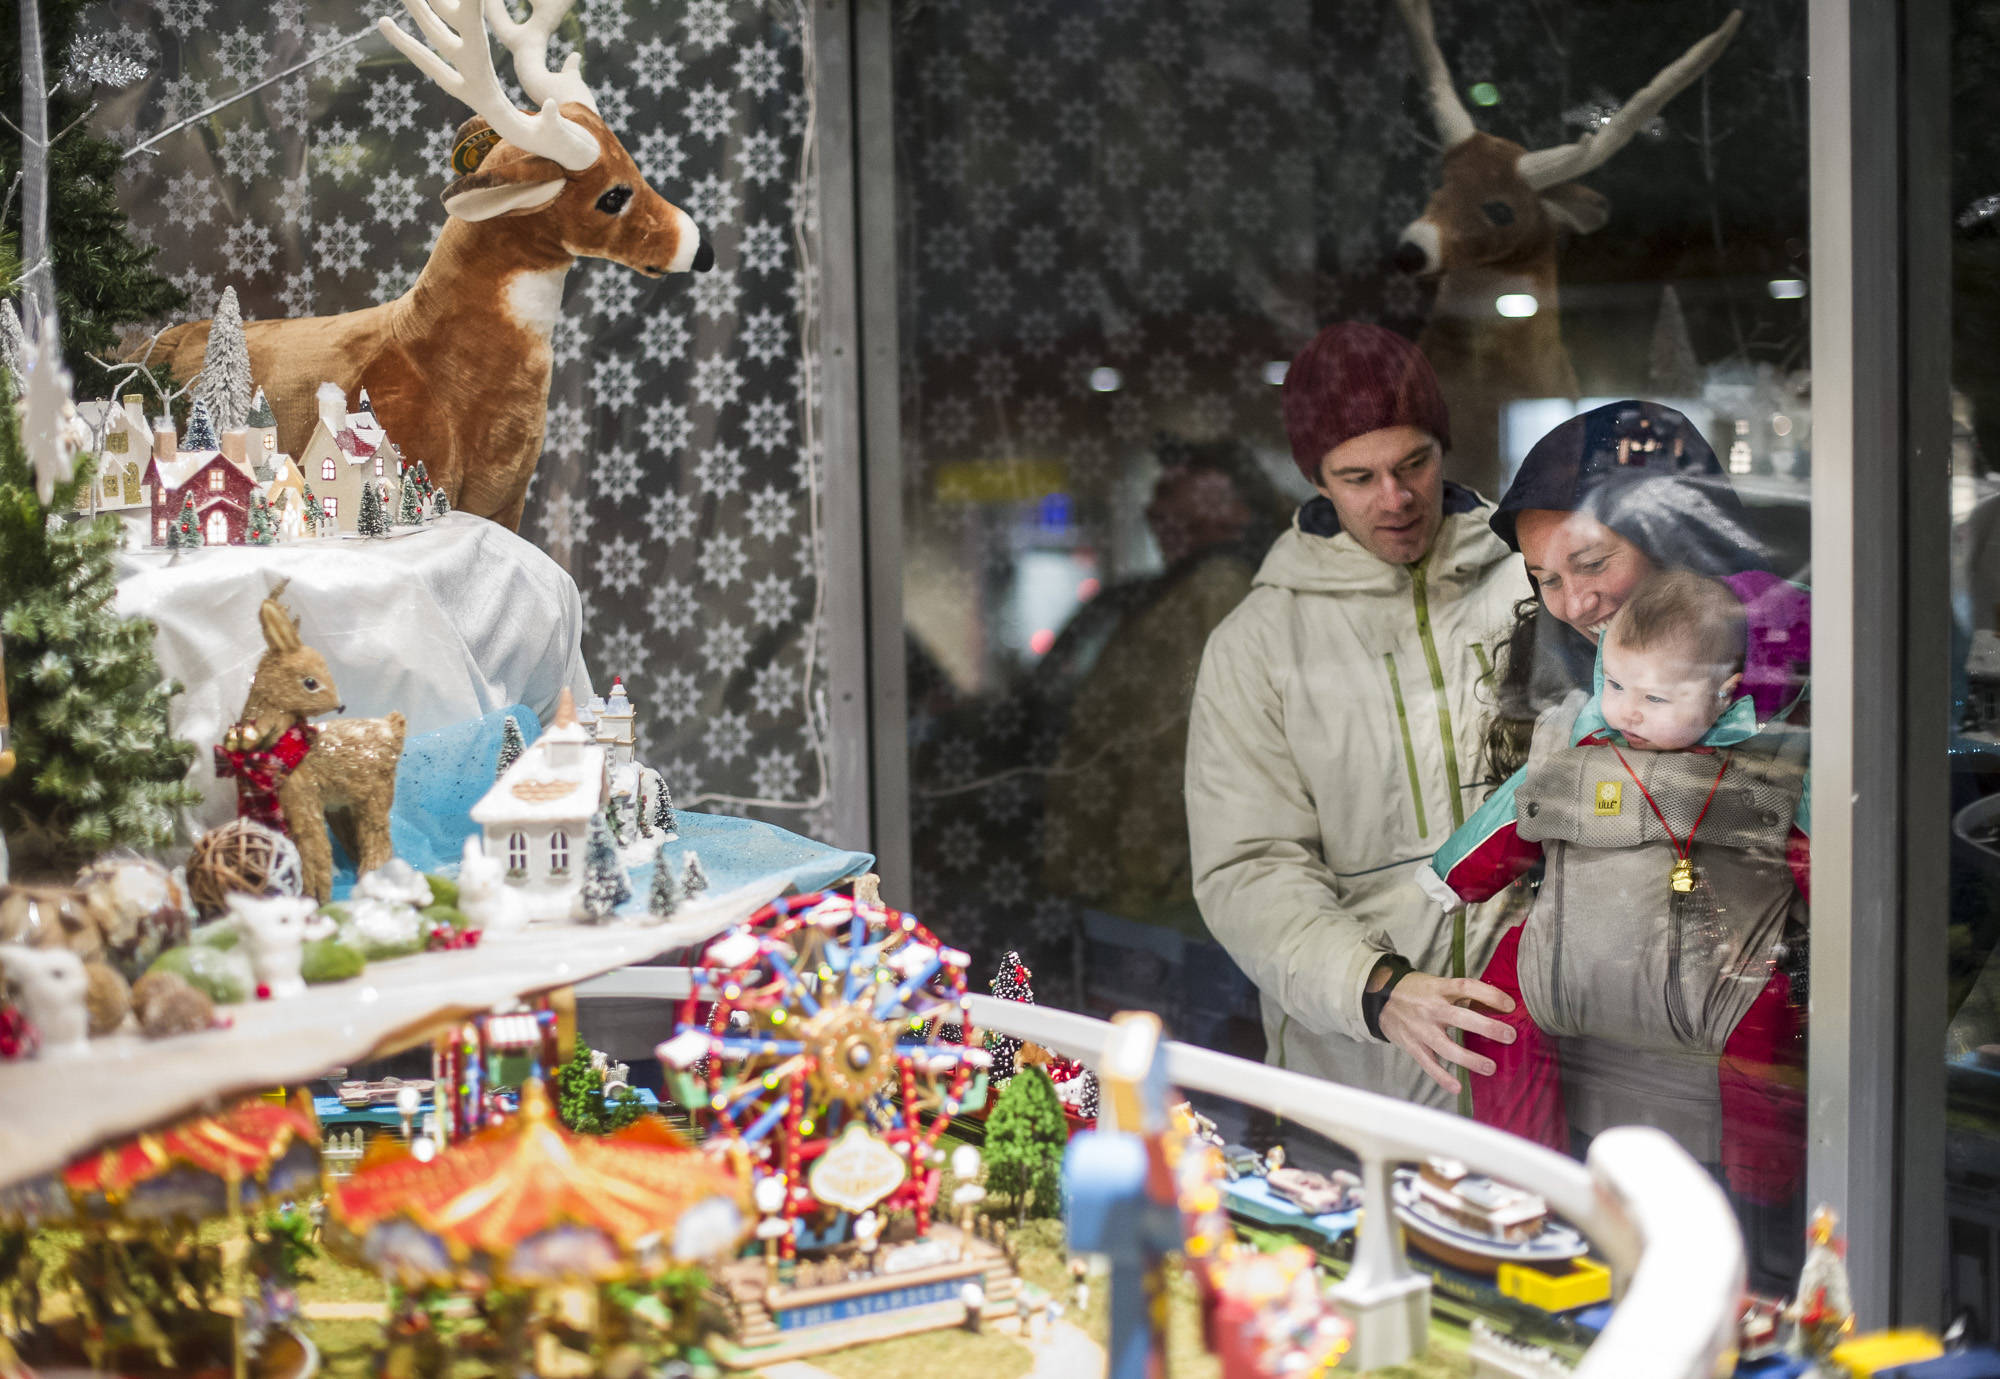 Kim McNamara and Paul Hackenmueller show their new daughter, Opal, the Christmas window at REACH during Gallery Walk on Friday, Dec. 2, 2016. (Michael Penn | Juneau Empire File Photo)